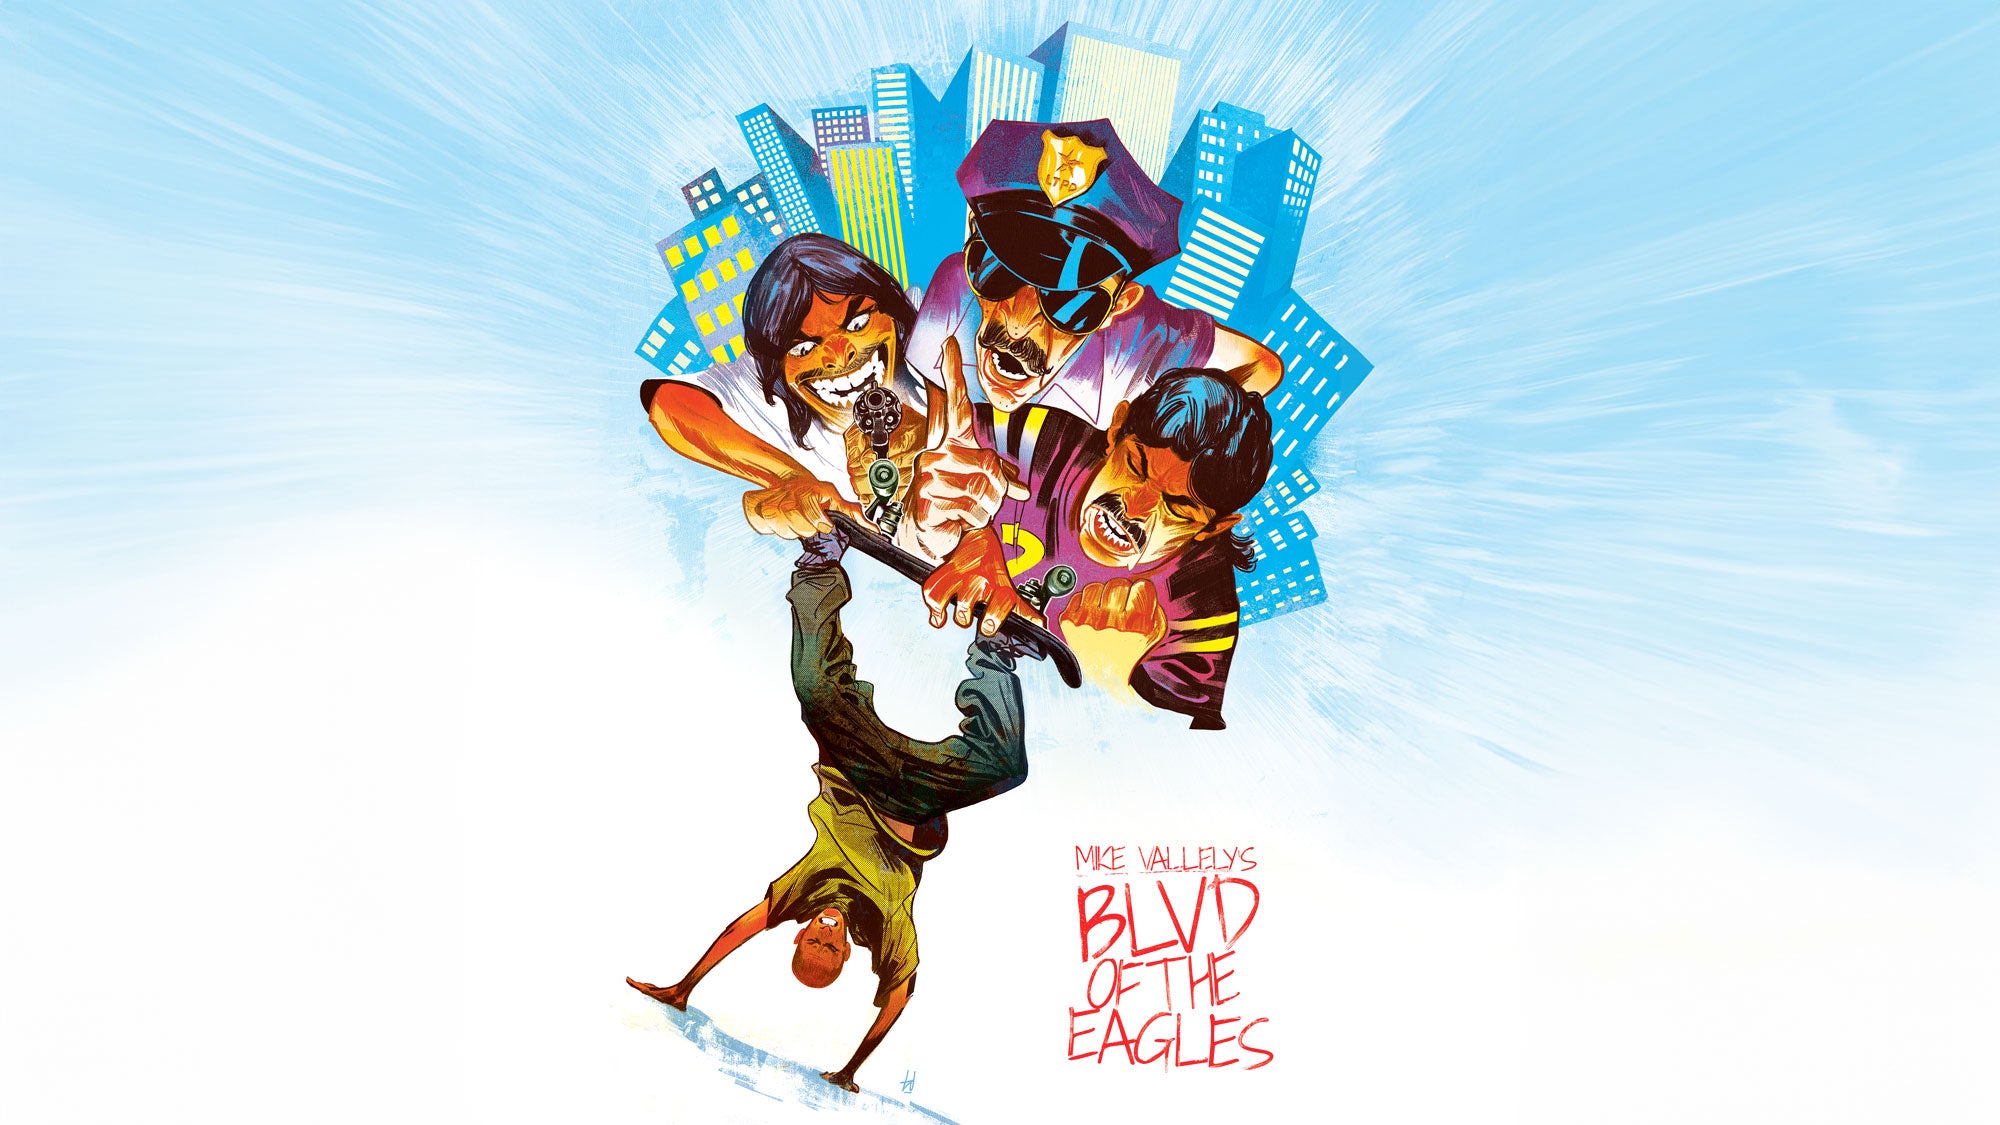 BLVD OF THE EAGLES